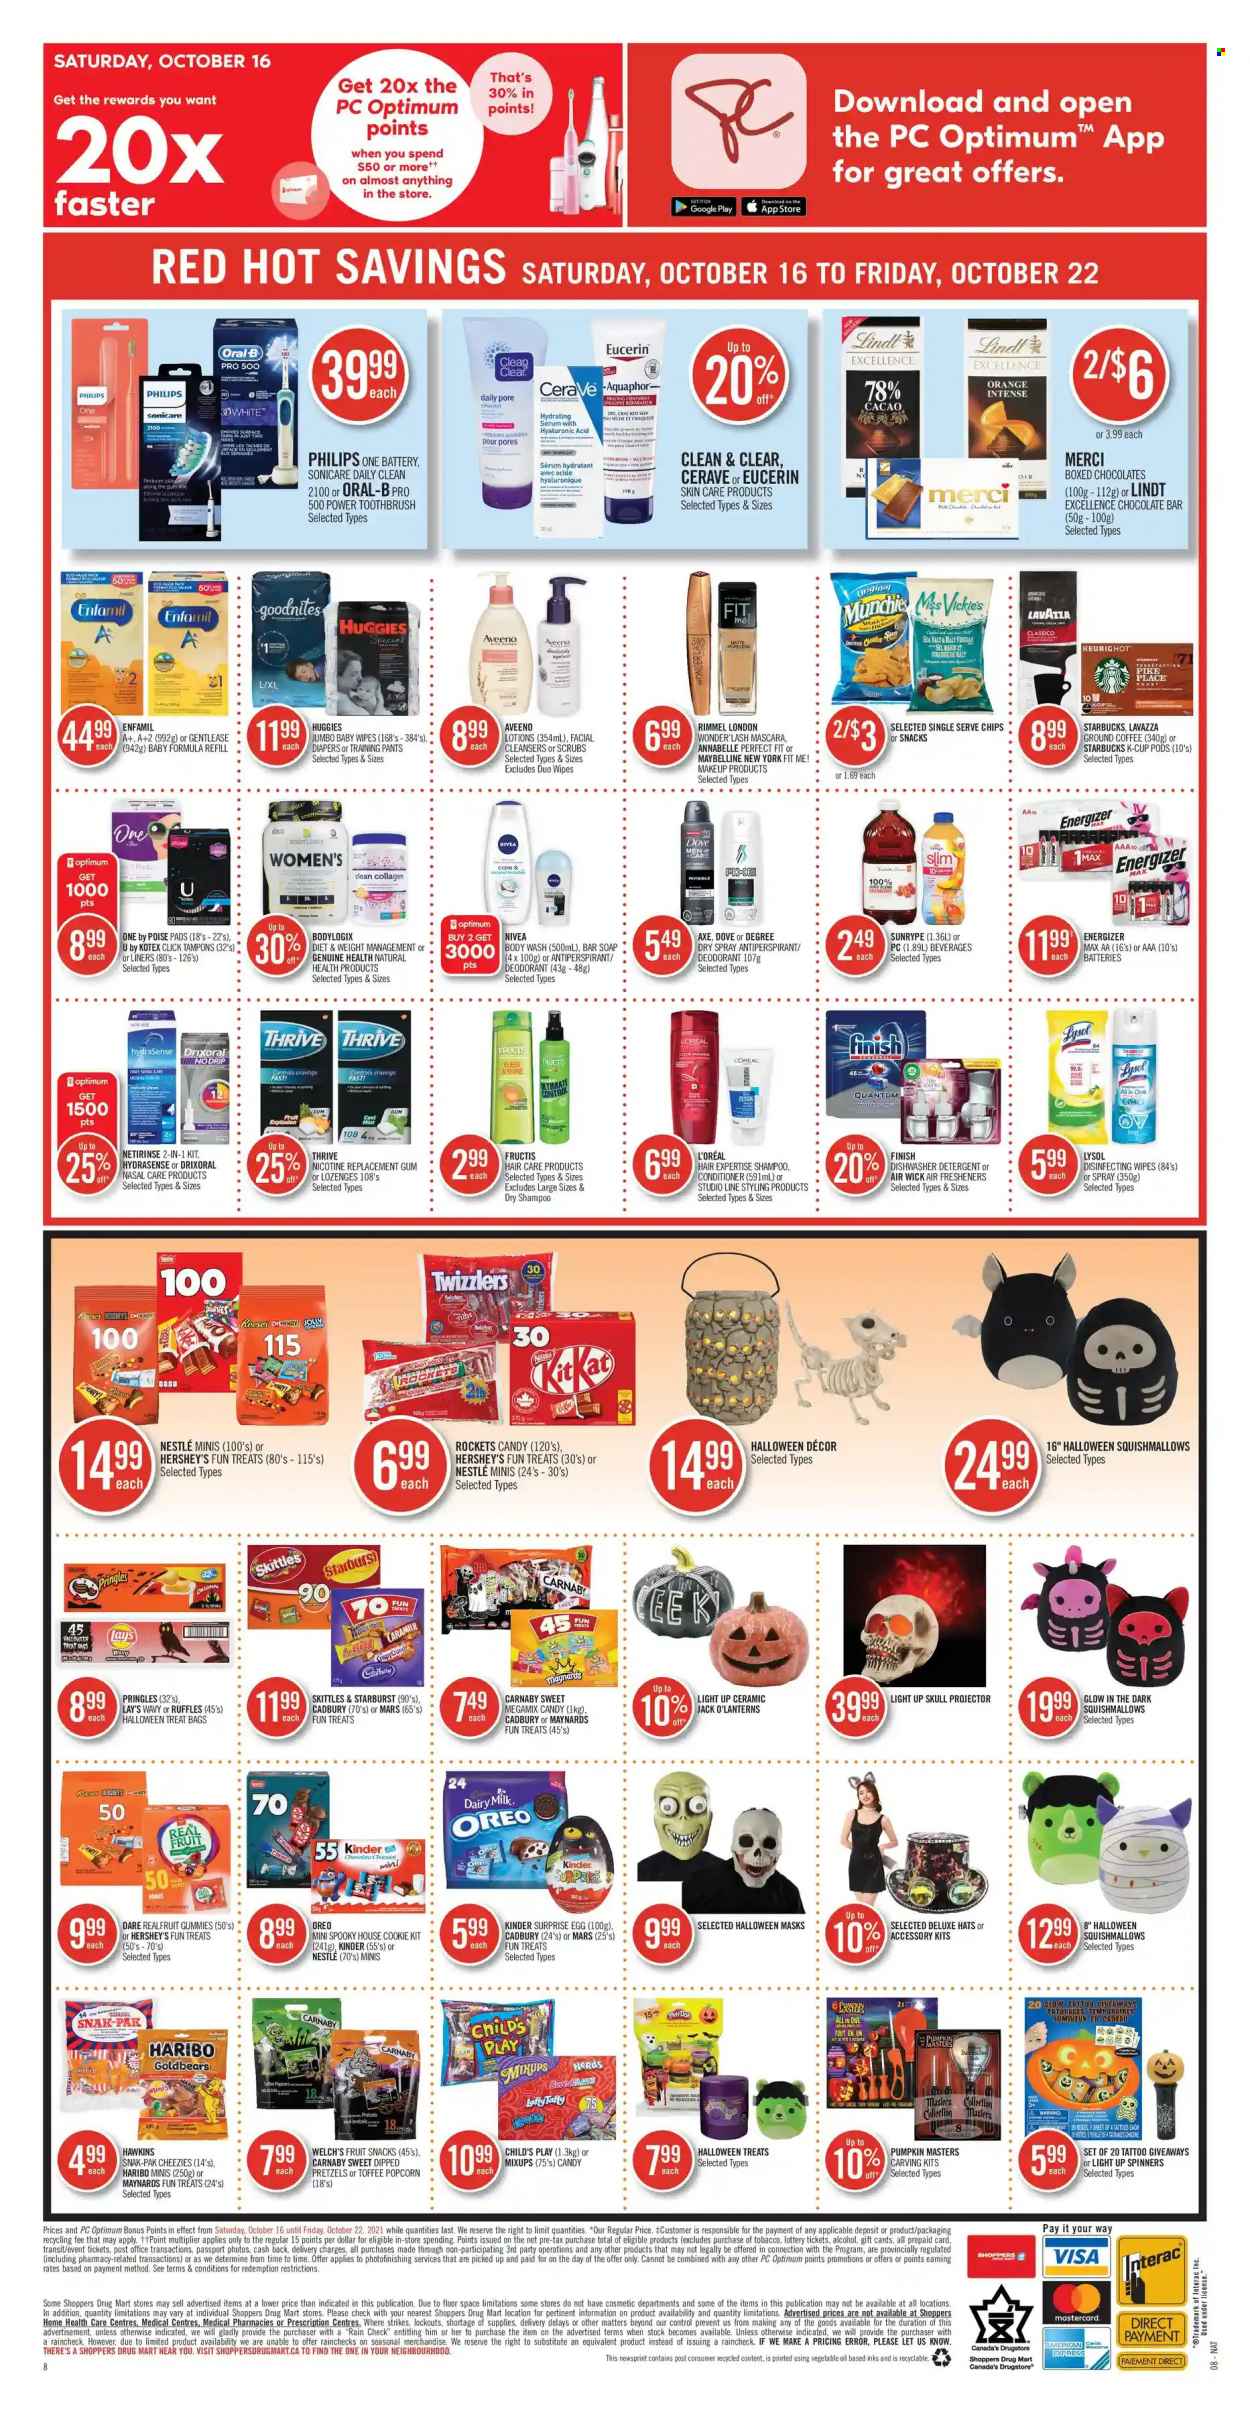 thumbnail - Shoppers Drug Mart Flyer - October 16, 2021 - October 22, 2021 - Sales products - Philips, pretzels, Haribo, Kinder Surprise, Mars, Reese's, Hershey's, Cadbury, Merci, Dairy Milk, Skittles, Welch's, fruit snack, Starburst, chocolate bar, Pringles, Lay’s, popcorn, Ruffles, malt, pumpkin, Classico, vegetable oil, oil, coffee, ground coffee, coffee capsules, Starbucks, K-Cups, Lavazza, Enfamil, wipes, pants, baby wipes, nappies, baby pants, Aquaphor, Aveeno, Lysol, body wash, soap bar, soap, toothbrush, Kotex, tampons, CeraVe, L’Oréal, serum, Clean & Clear, conditioner, Fructis, anti-perspirant, makeup, mascara, Rimmel, Sonicare, alcohol, Nestlé, Oreo, detergent, Dove, Energizer, Eucerin, Maybelline, shampoo, Huggies, Nivea, Oral-B, chips, Lindt, deodorant. Page 15.